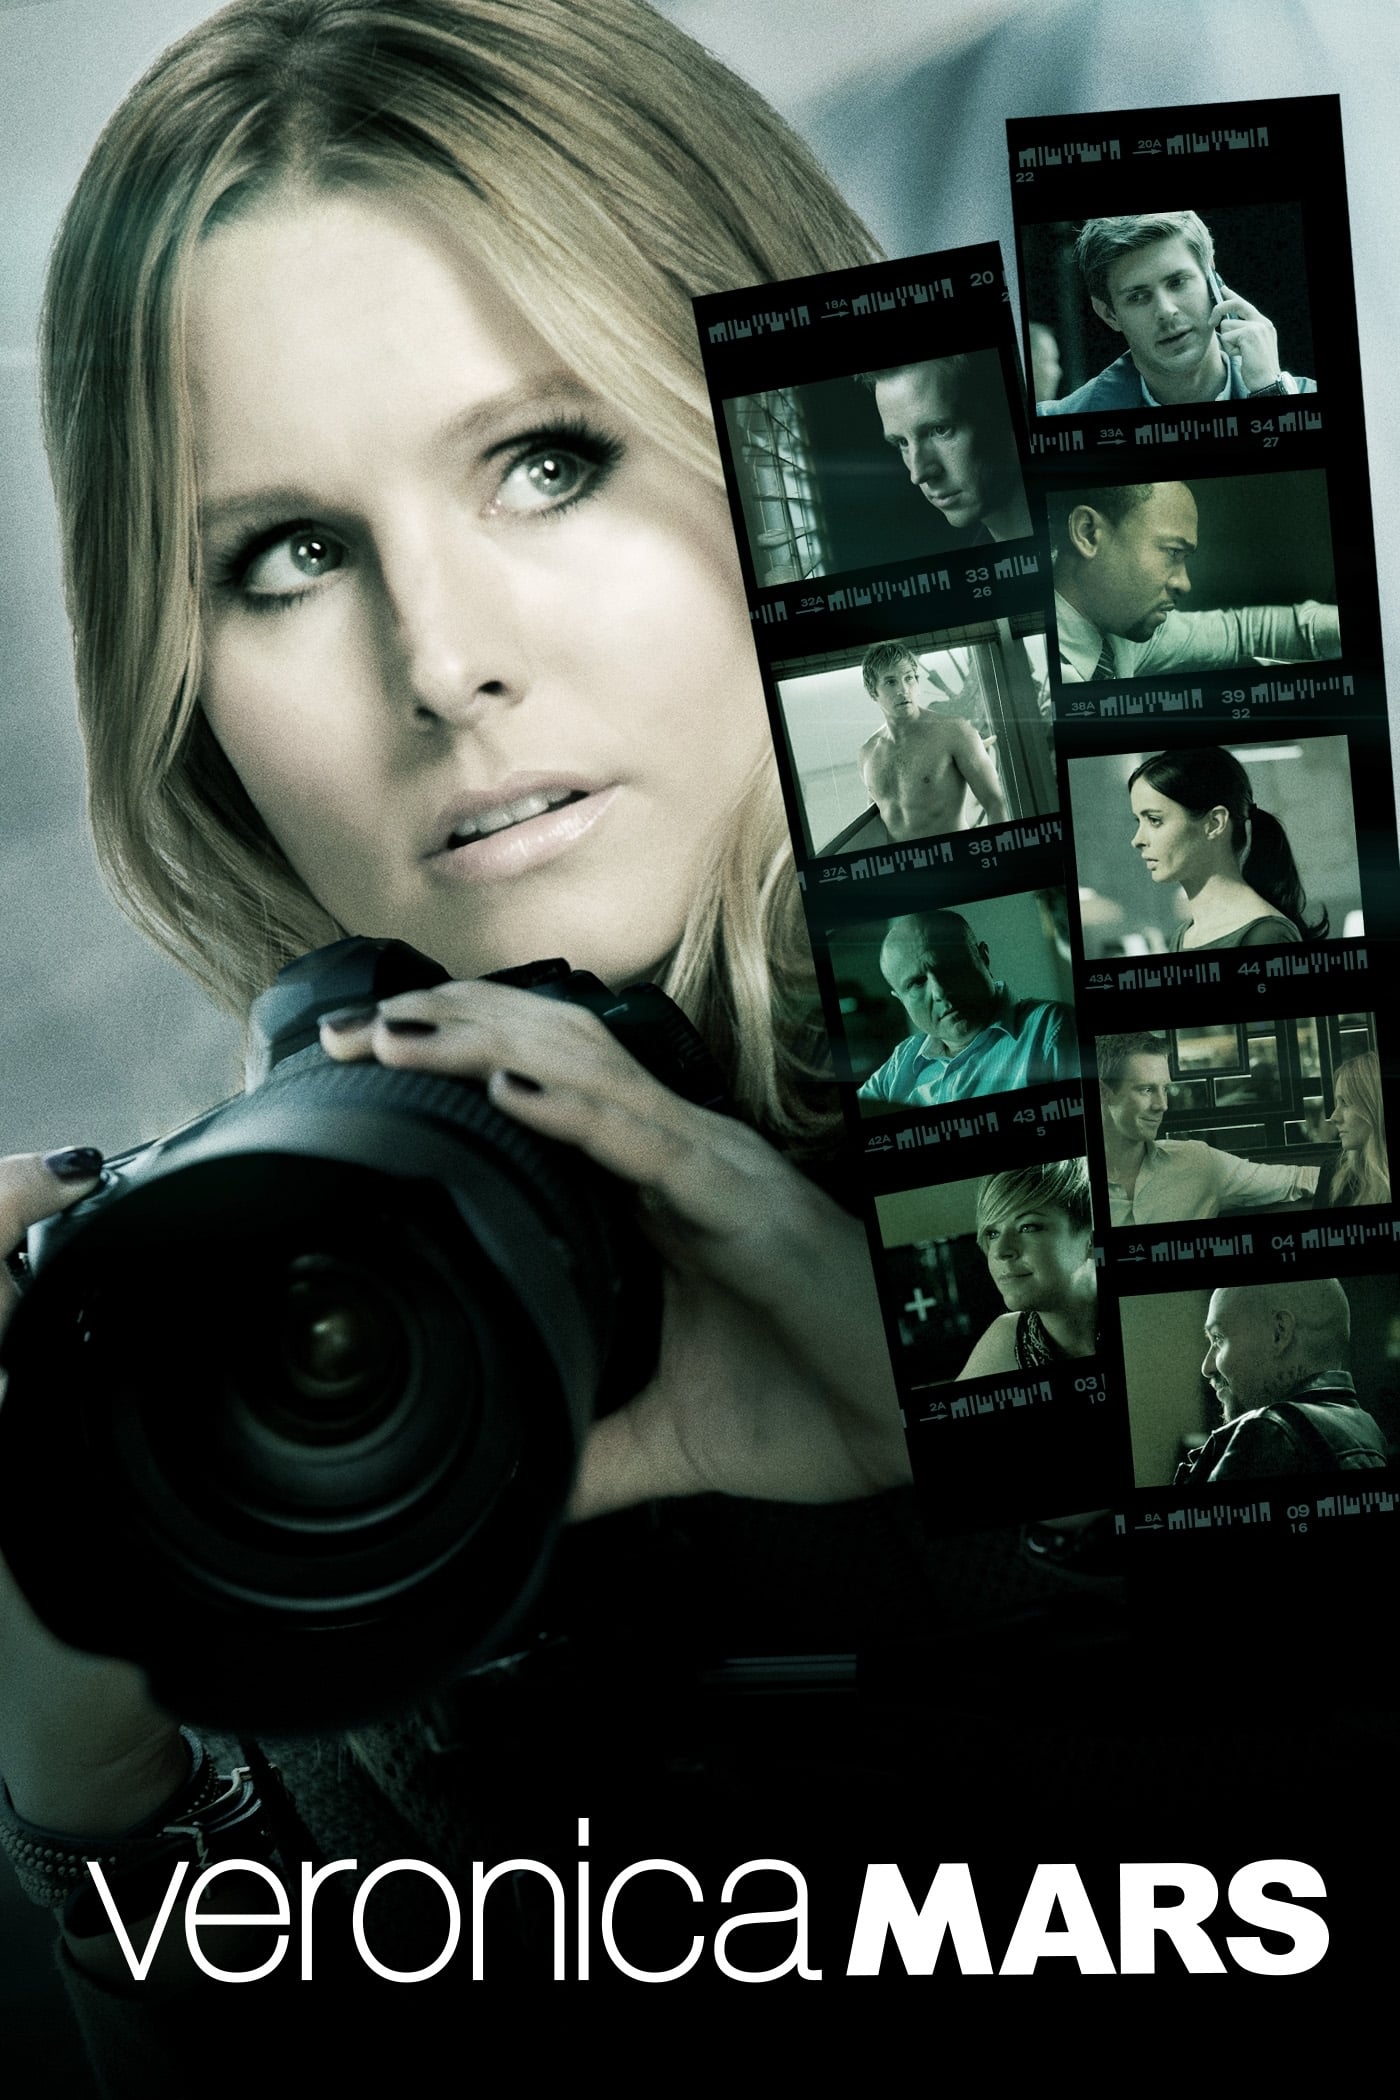 Poster for the movie "Veronica Mars"